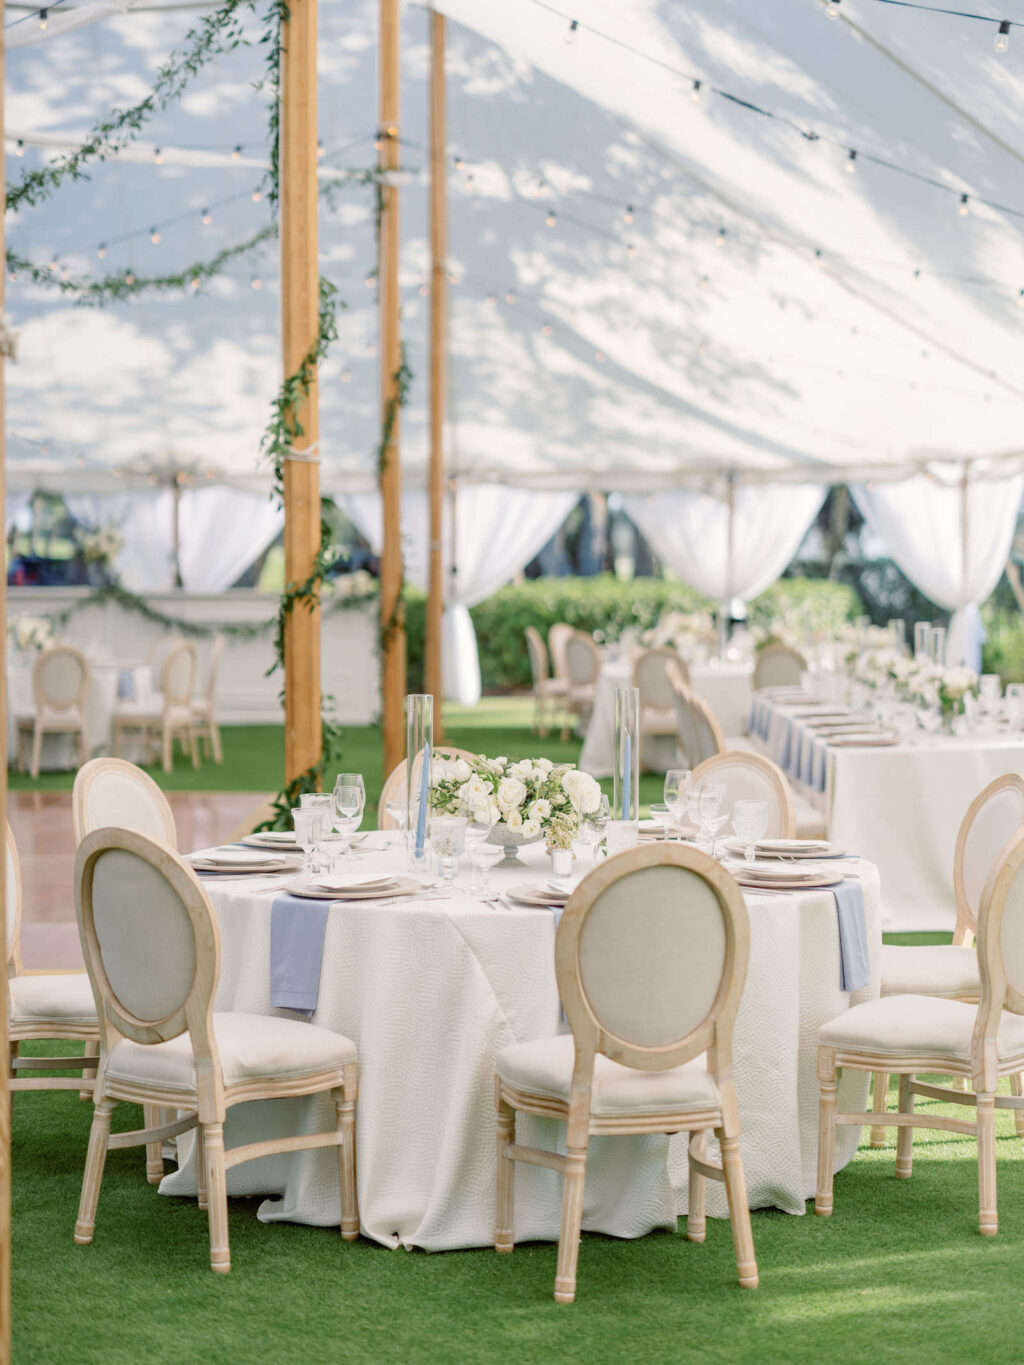 Luxurious Outdoor Tented Reception at Harbourside Lawn | Florida Wedding Venue The Resort at Longboat Key Club